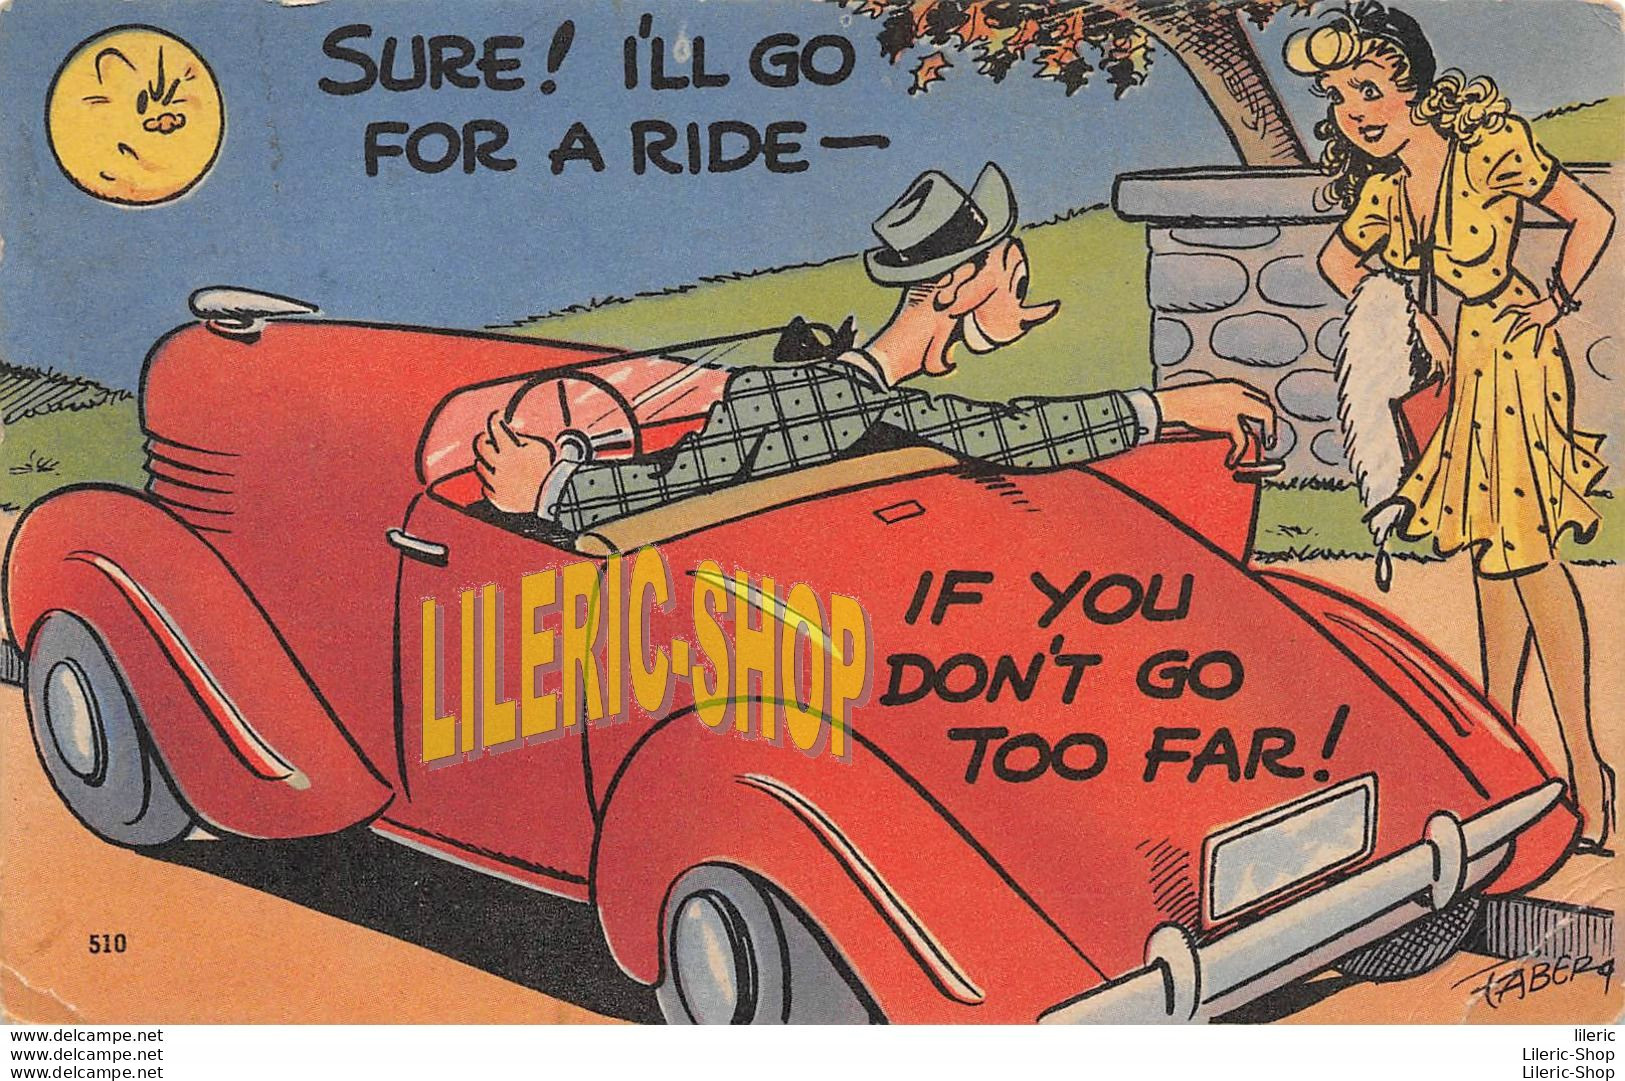 Vintage 1950s Comic Postcard SURE ! I'LL GO FOR A RIDE - IF YOU DON'T GO TOO FAR ! # Convertible Car - Humor